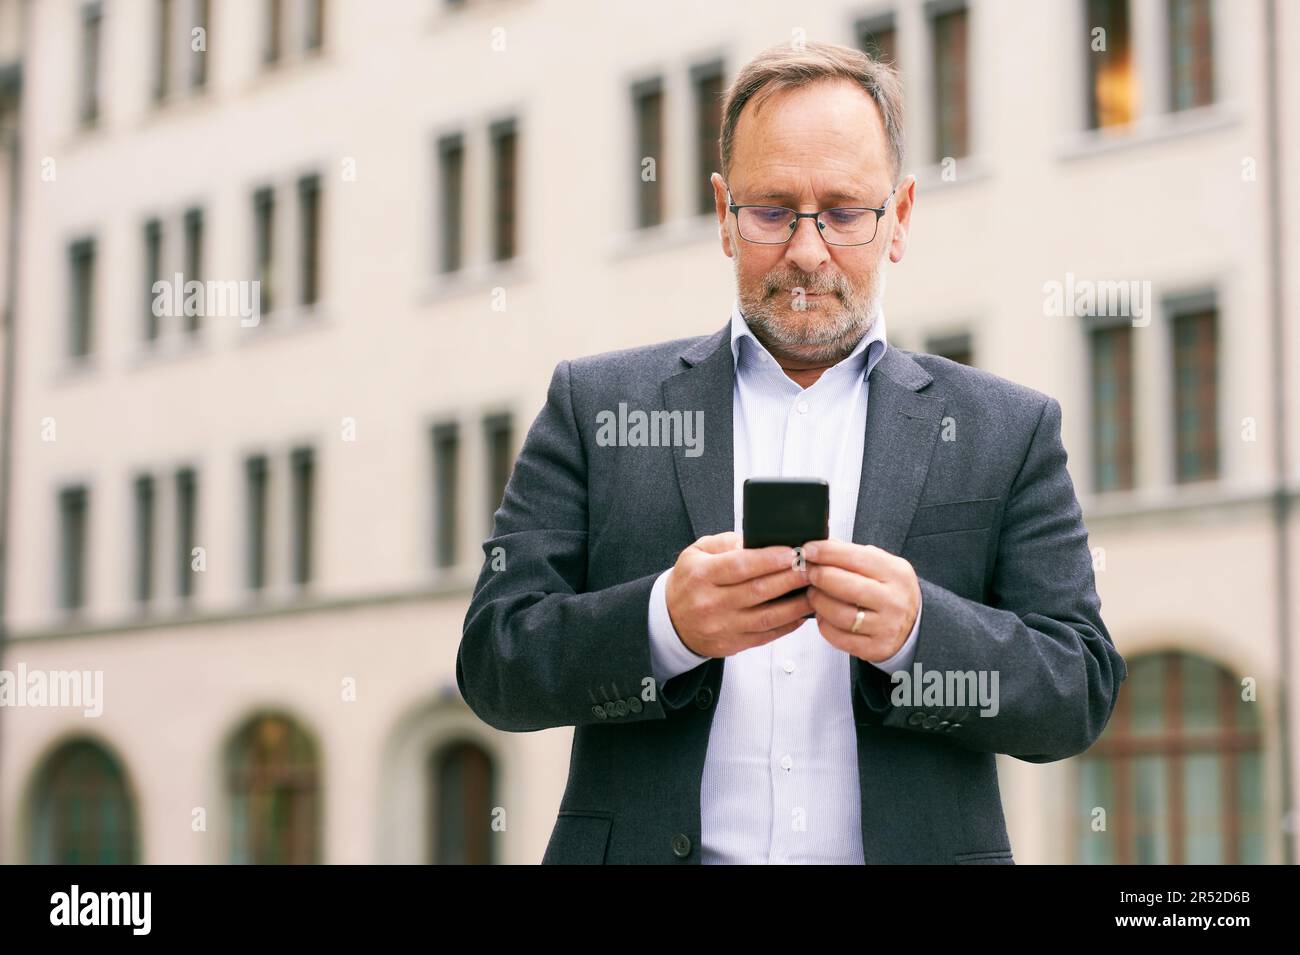 Outdoor portrait of middle age man, wearing glasses and grey suit, holding smartphone Stock Photo